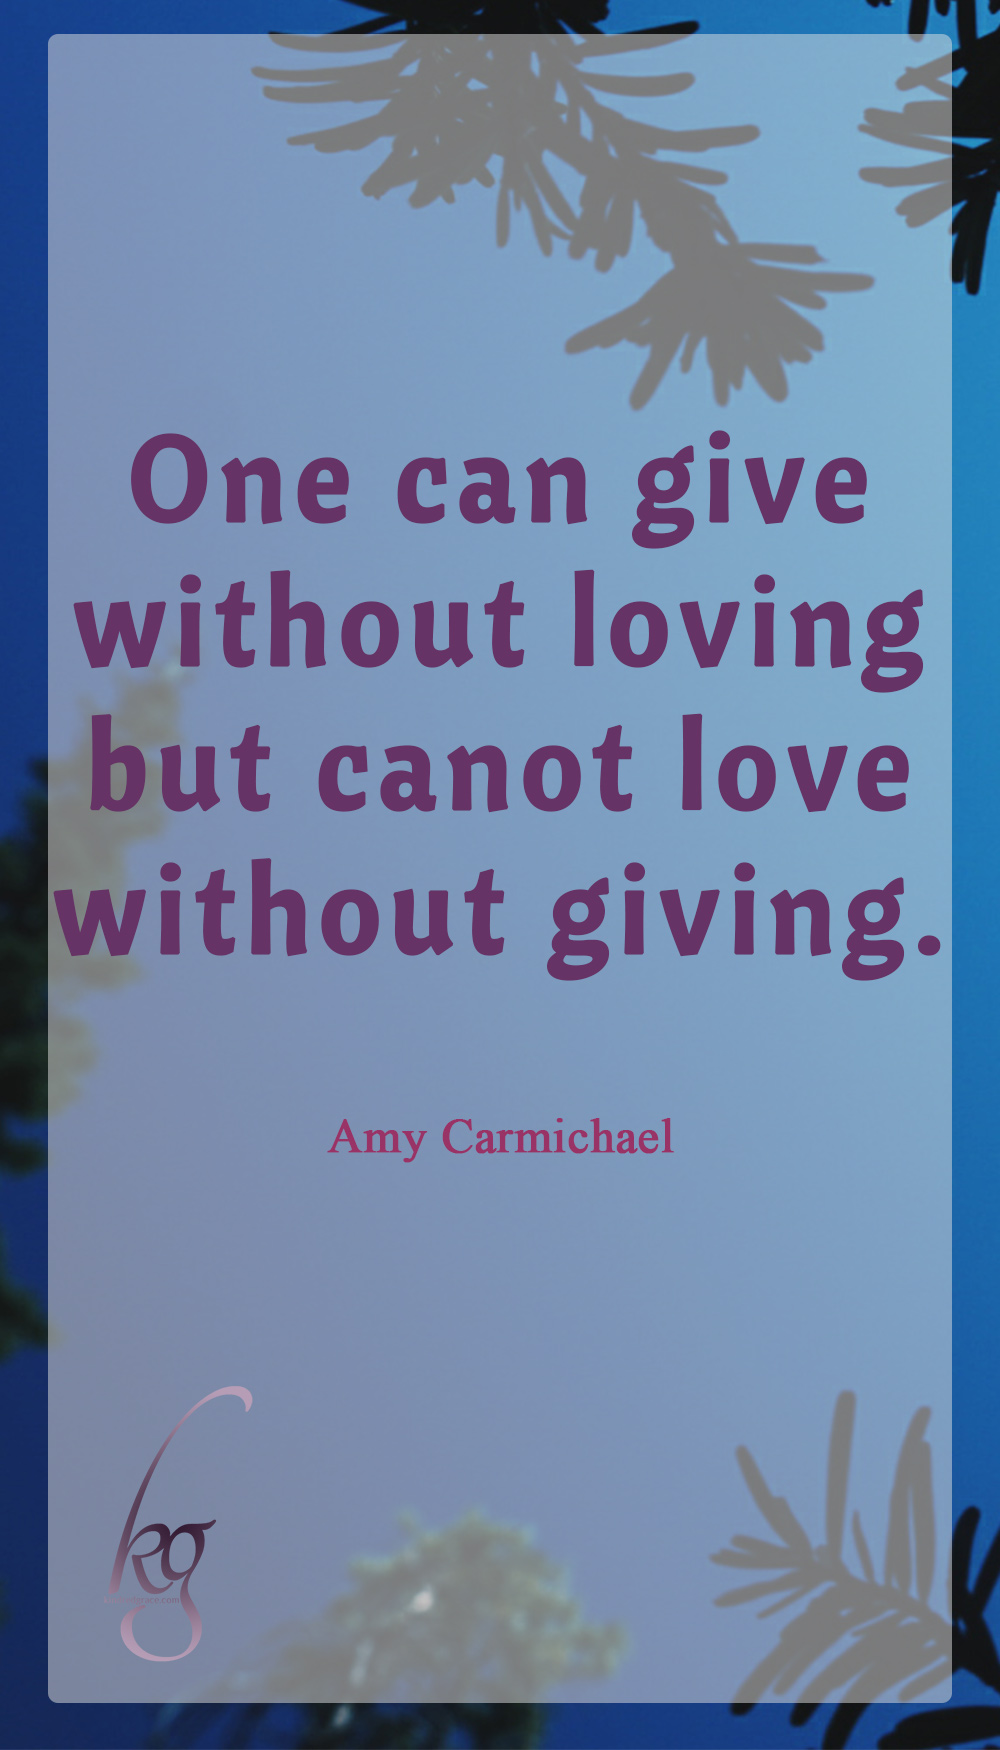 One can give without loving, but one cannot love without giving. (Amy Carmichael)